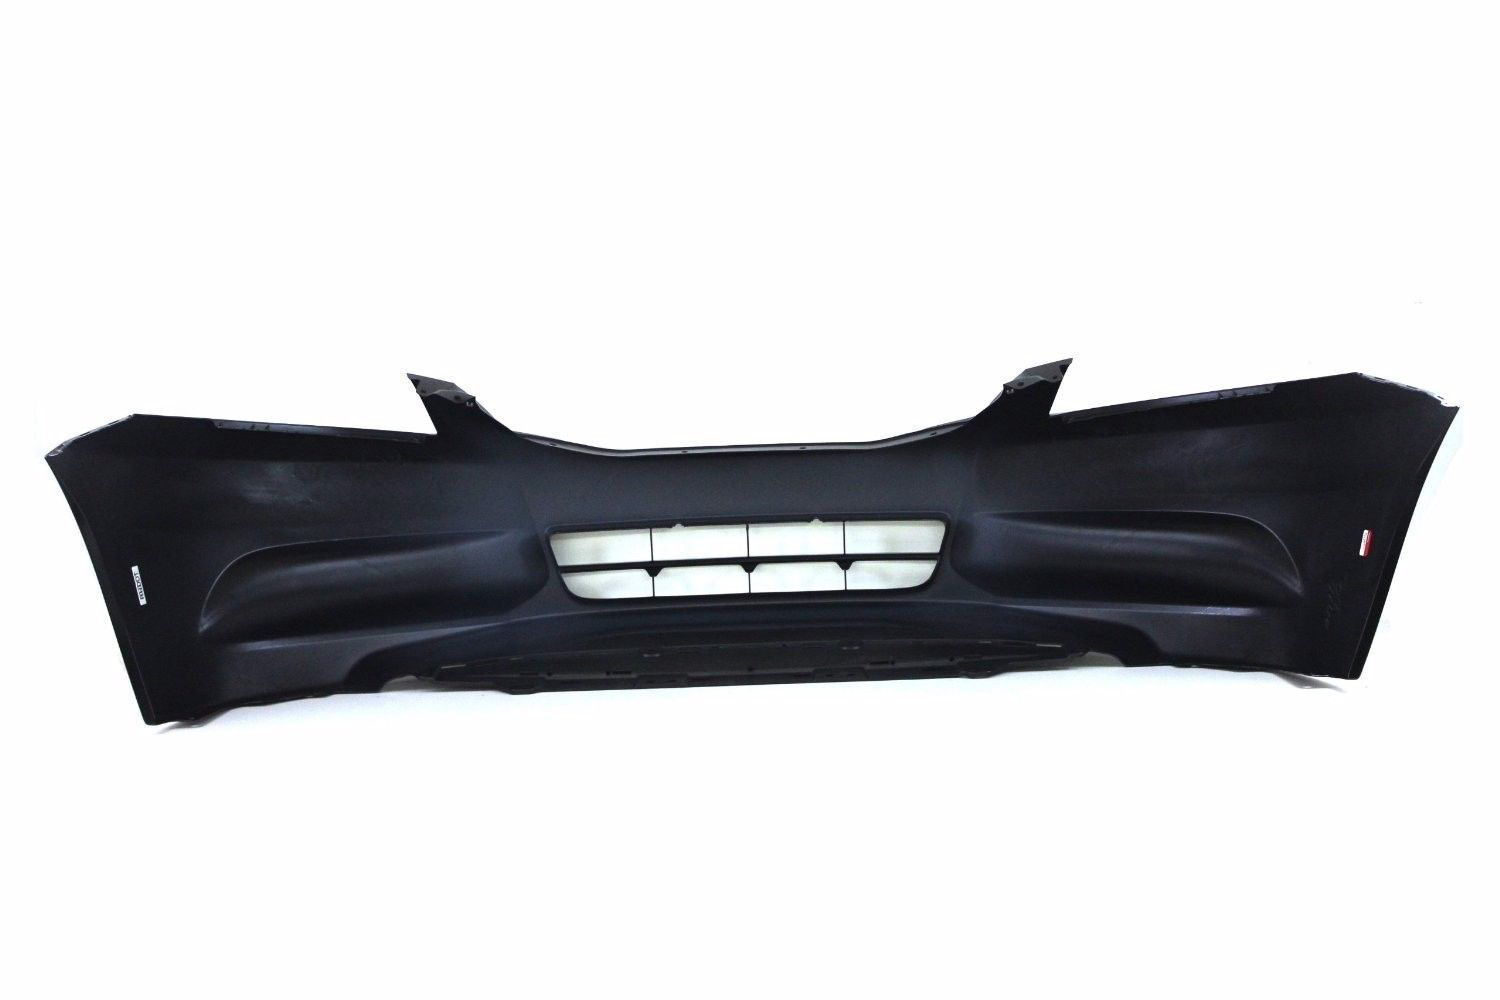 2011-2012 HONDA ACCORD Front Bumper Cover Sedan  4 Cyl Painted to Match